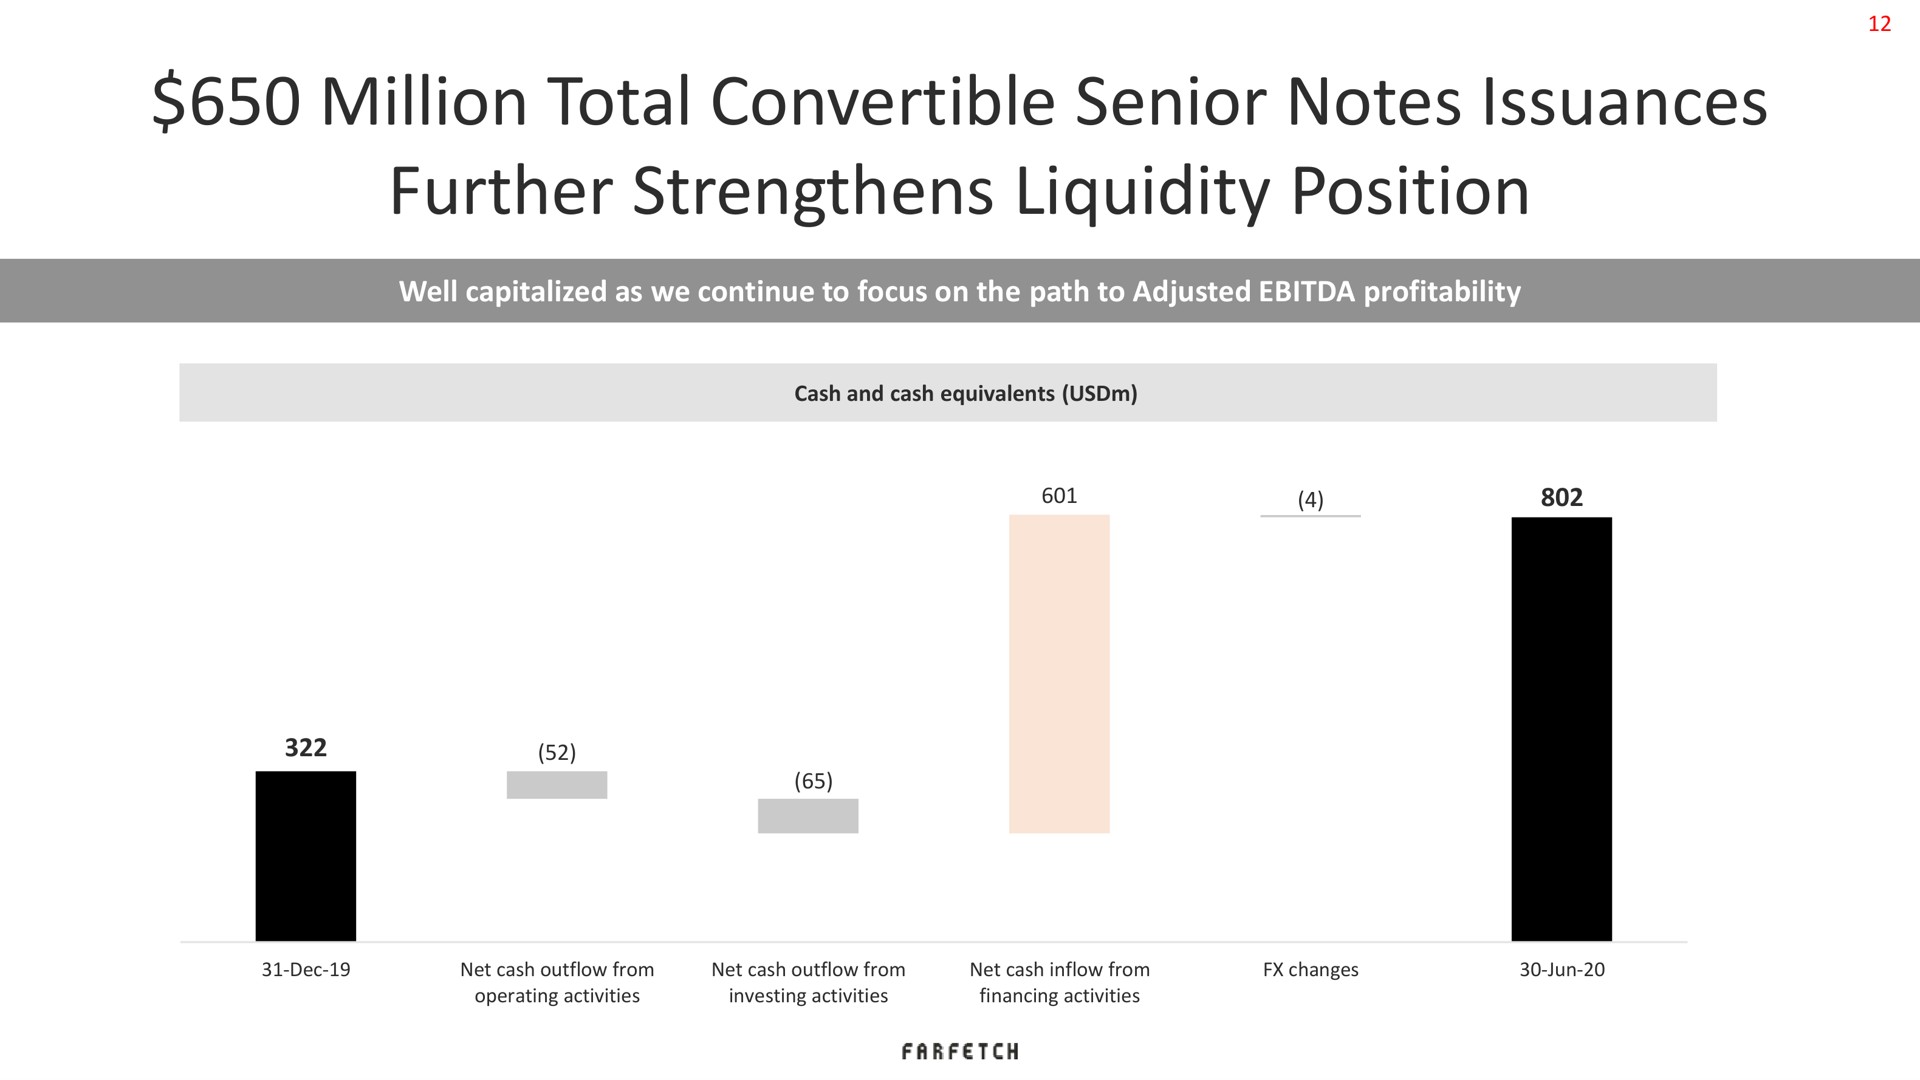 million total convertible senior notes issuances further strengthens liquidity position | Farfetch